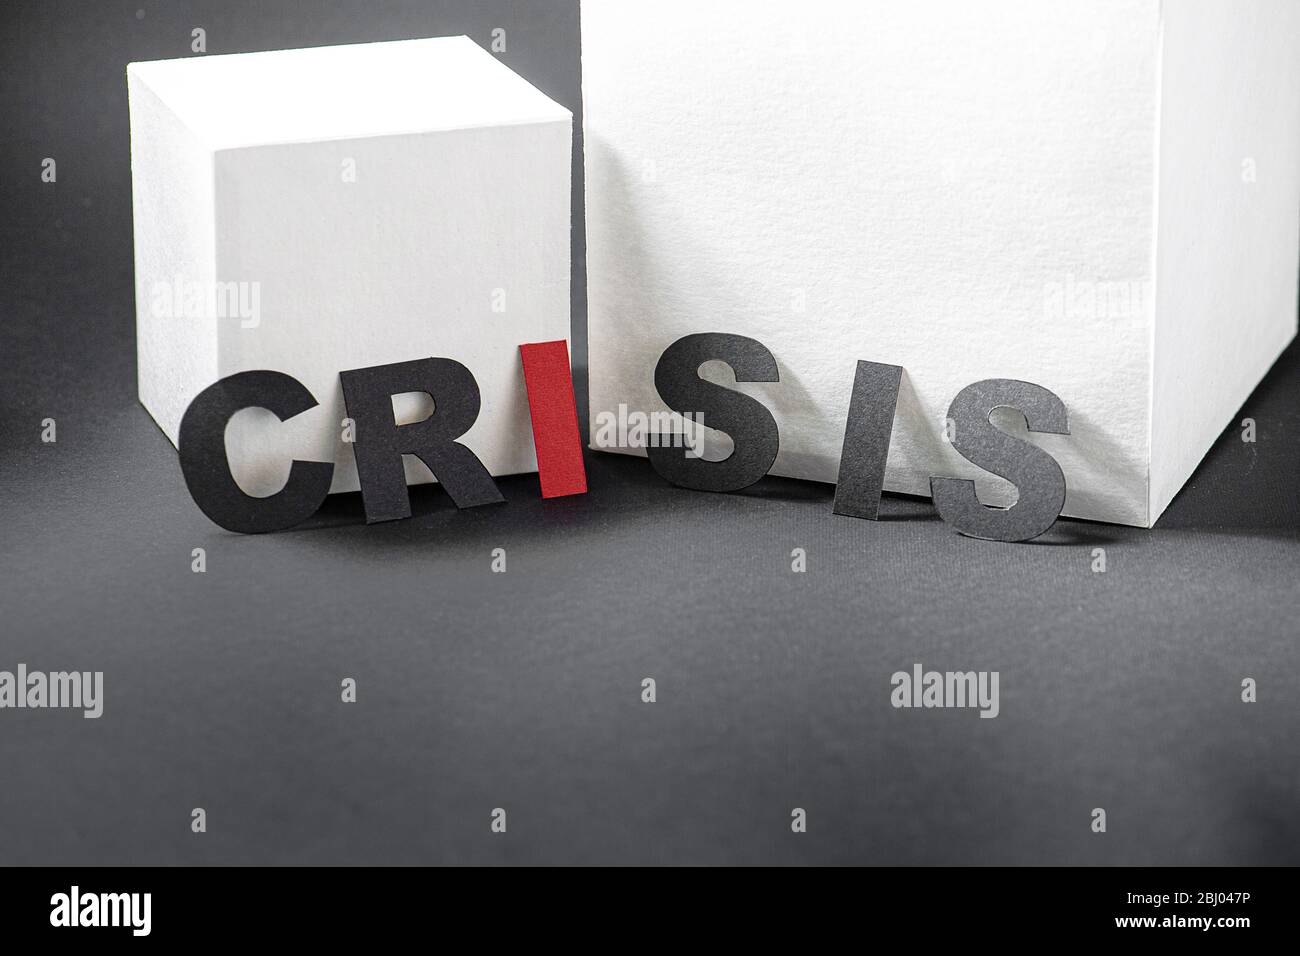 Crisis word letters in front of white cubes placed unevenly Stock Photo